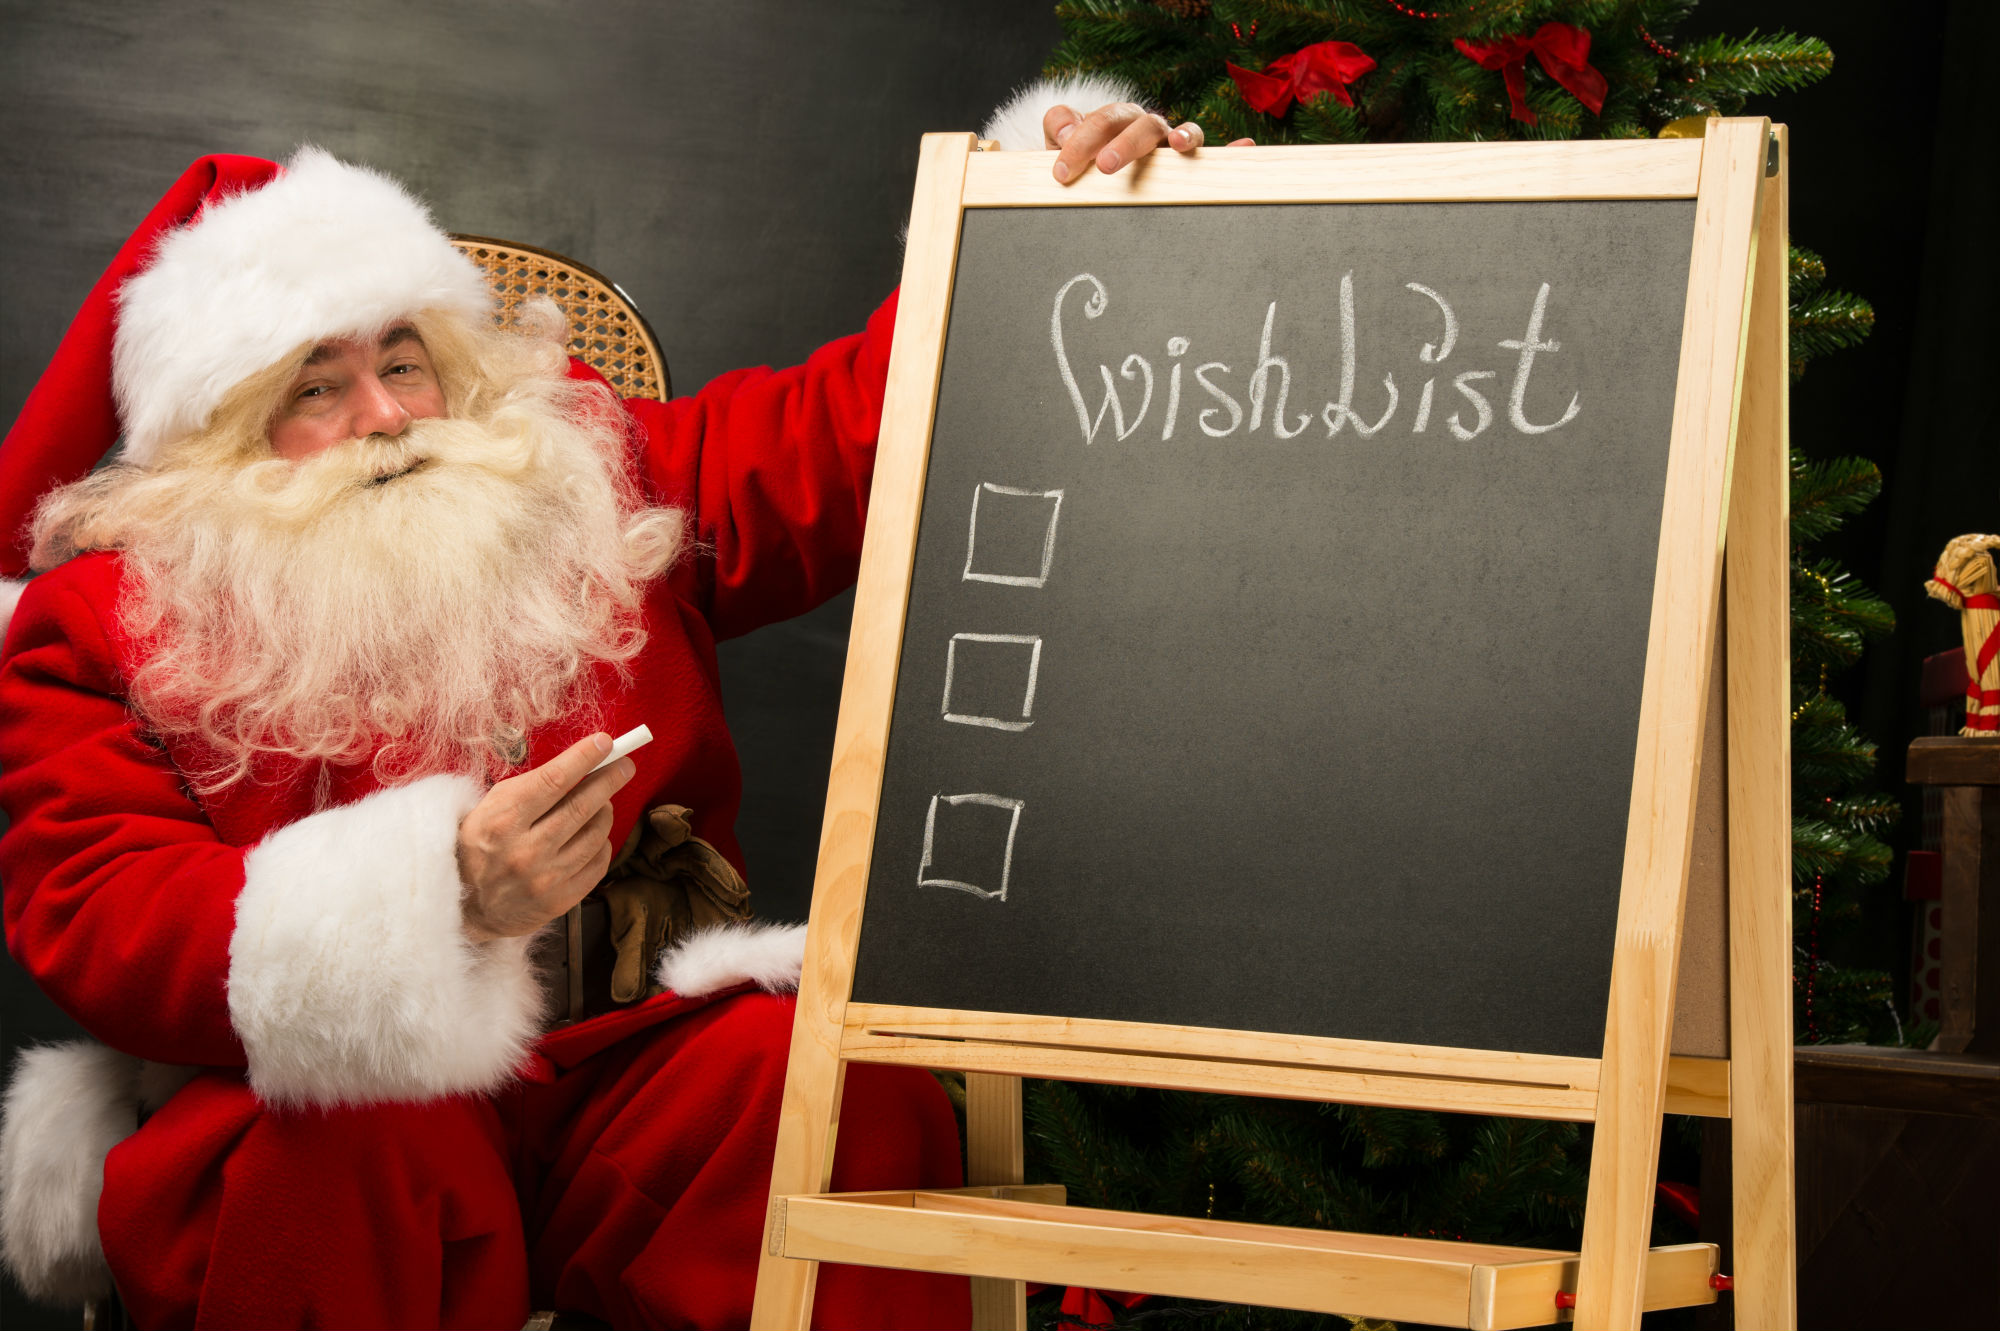 5 Books That Should Be on Every Content Strategist’s Holiday Wish List